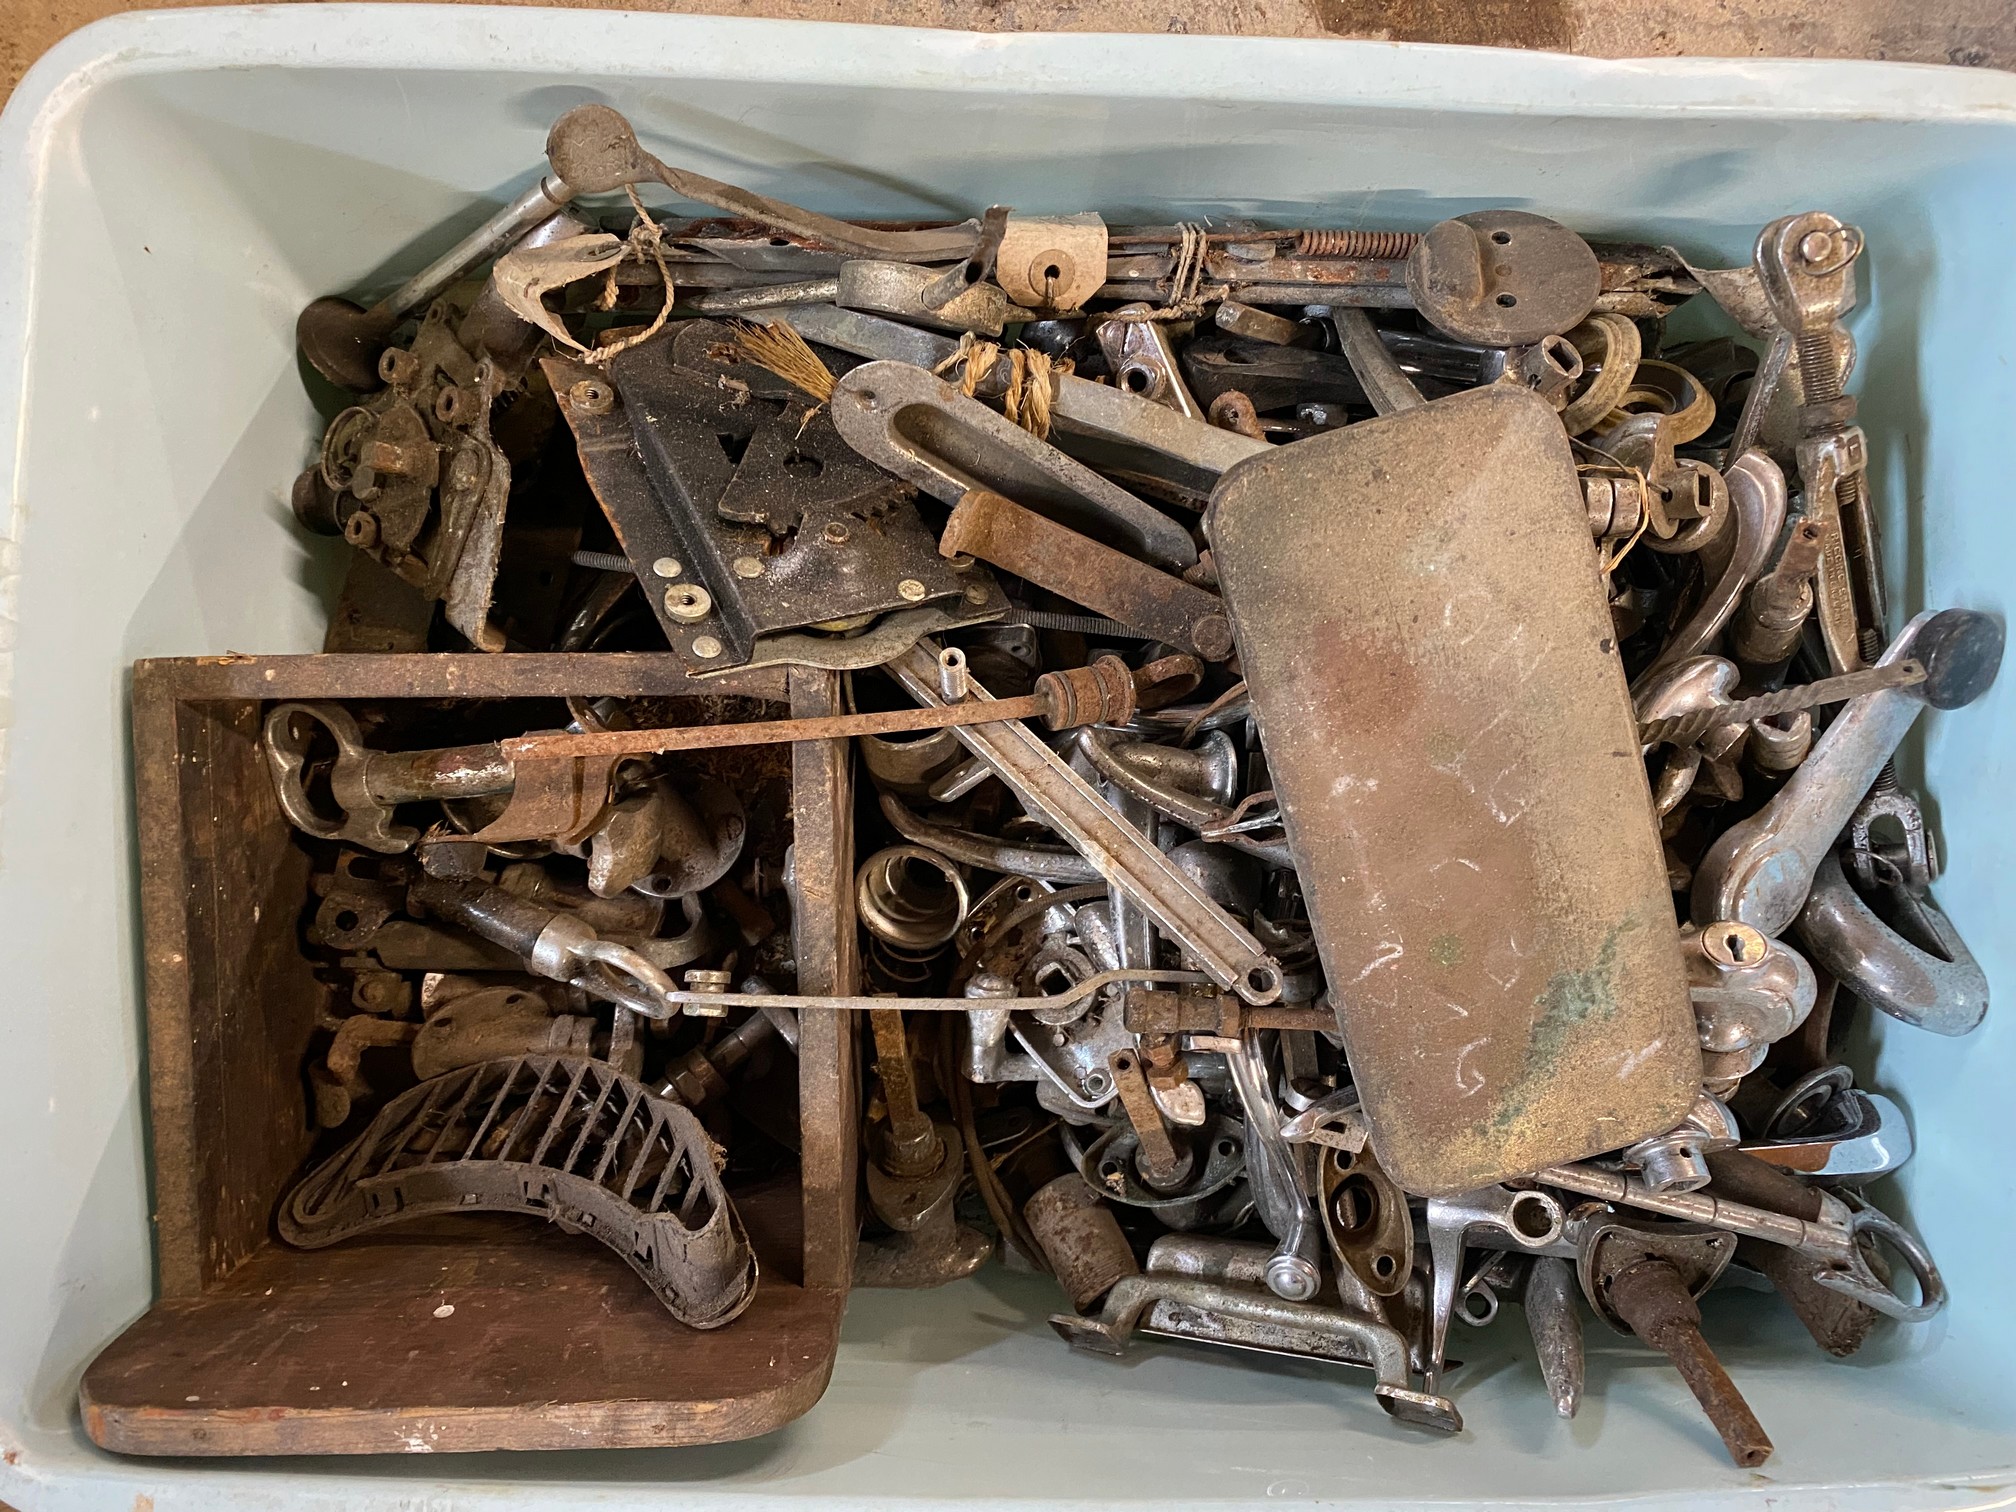 A tray of assorted car parts, chrome handles and bonnet catches included.